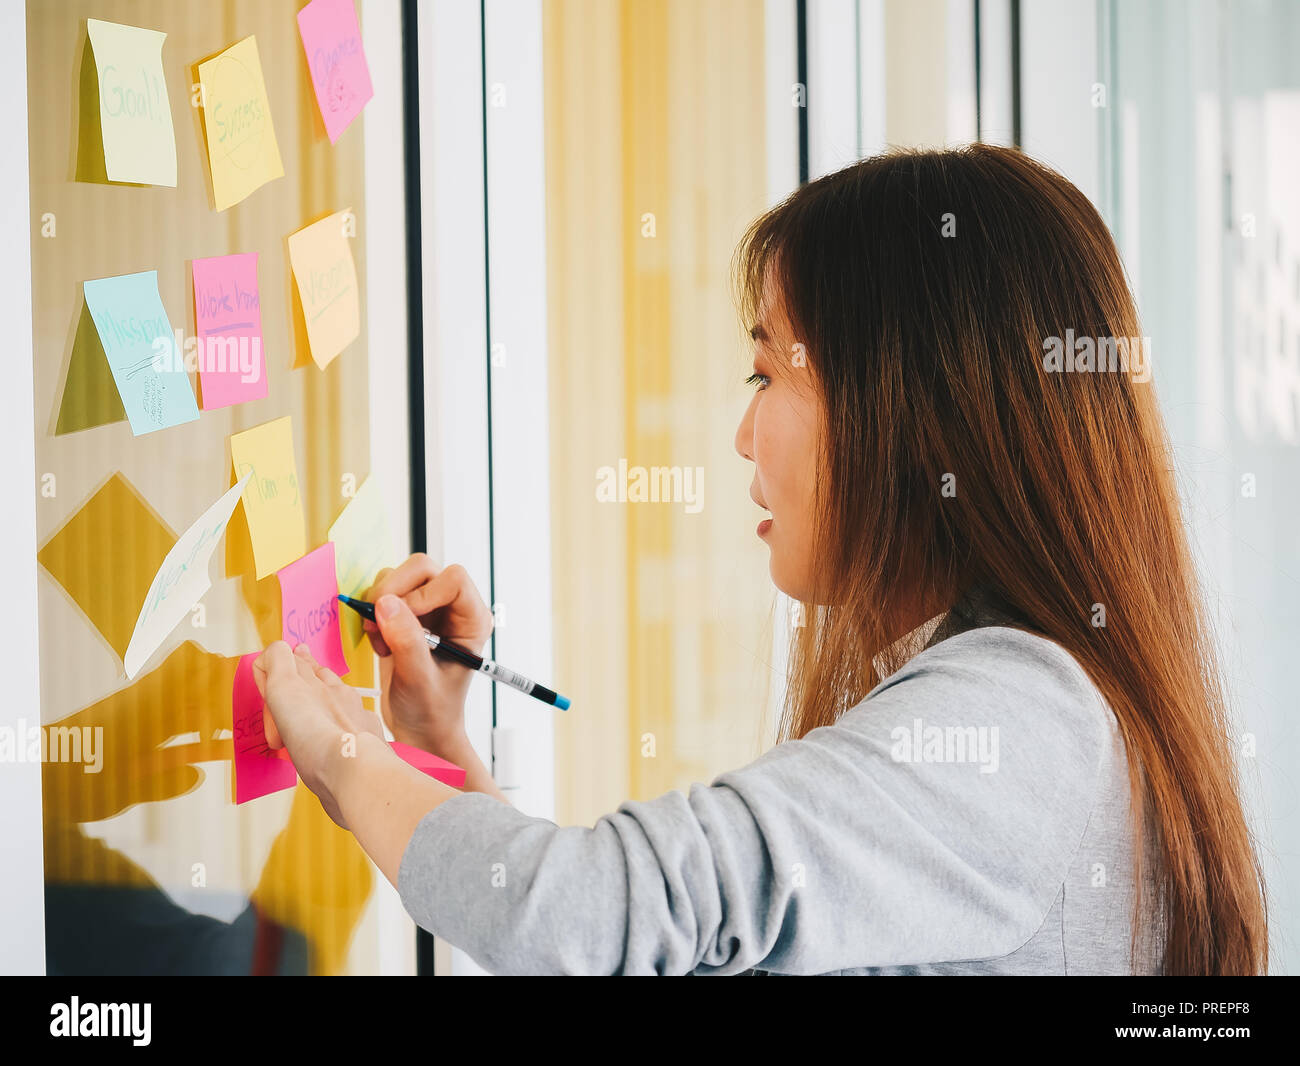 Thoughtful businesswoman looking at sticky notes stuck and thinking brainstorming on glass wall in creative office Stock Photo